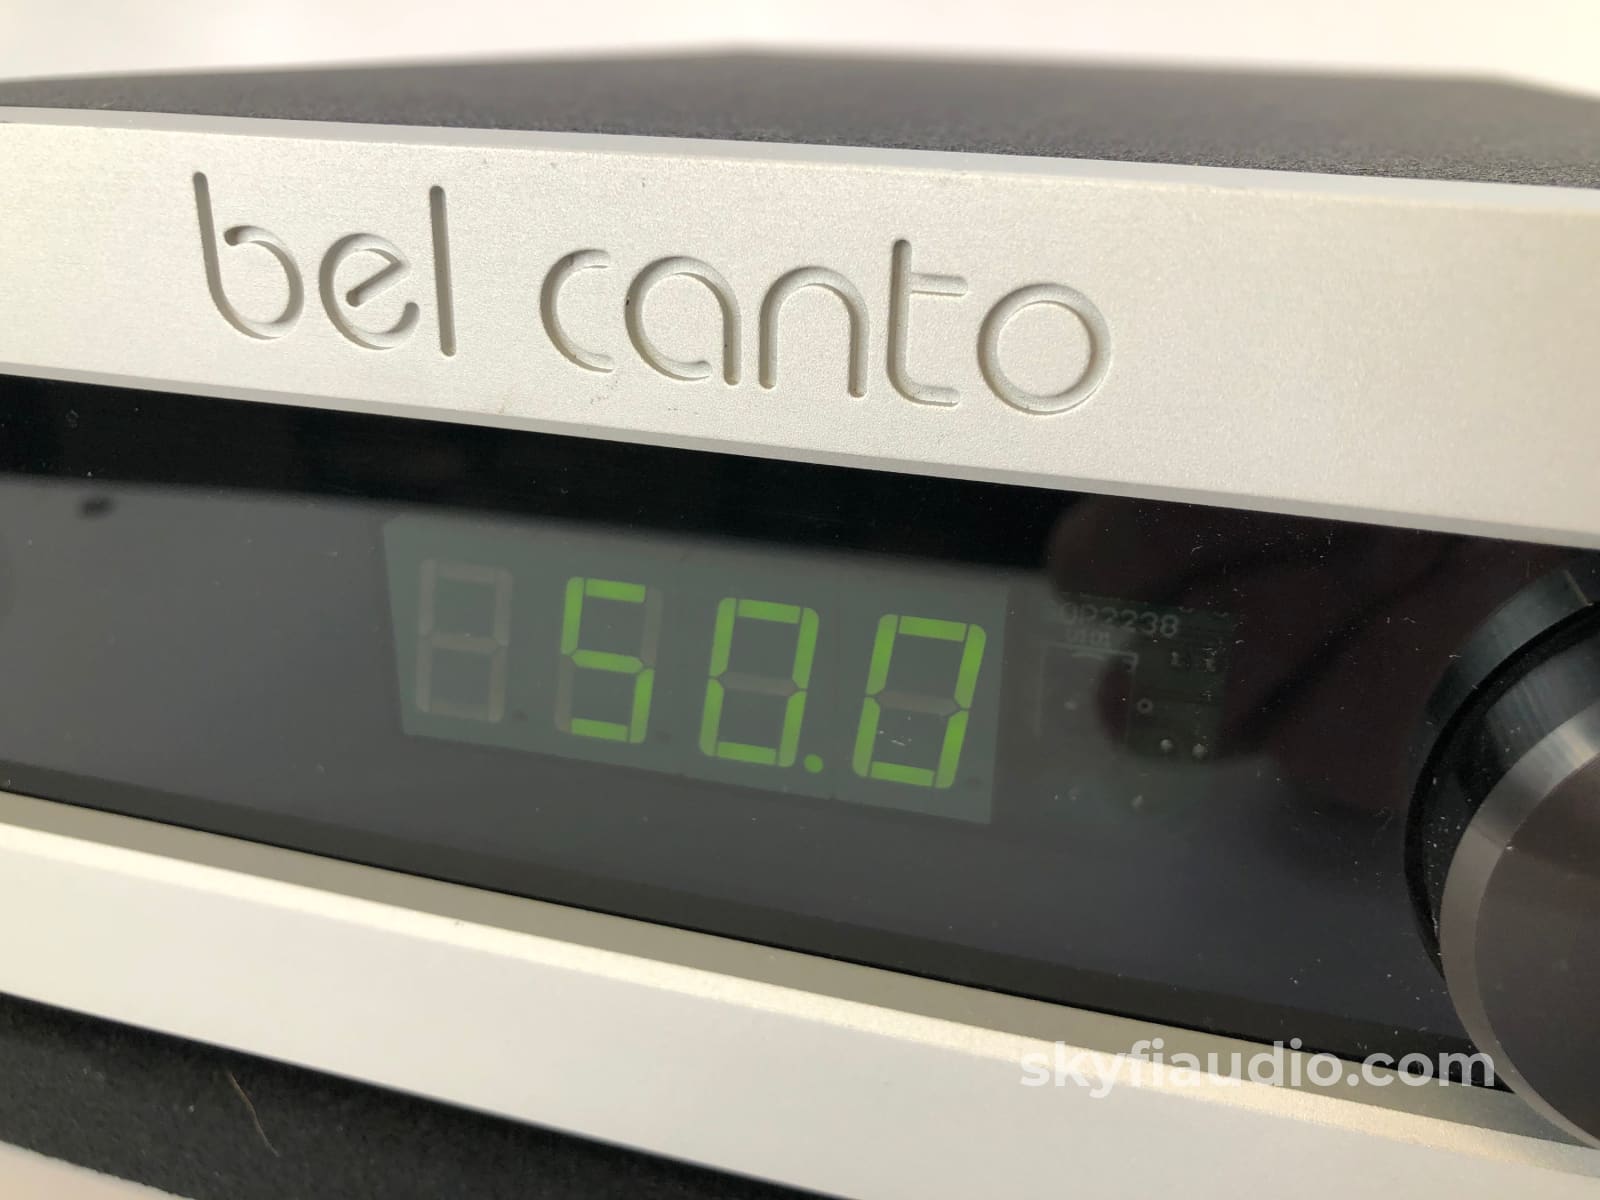 Bel Canto C5I Dac Integrated Amplifier - With Phono Input